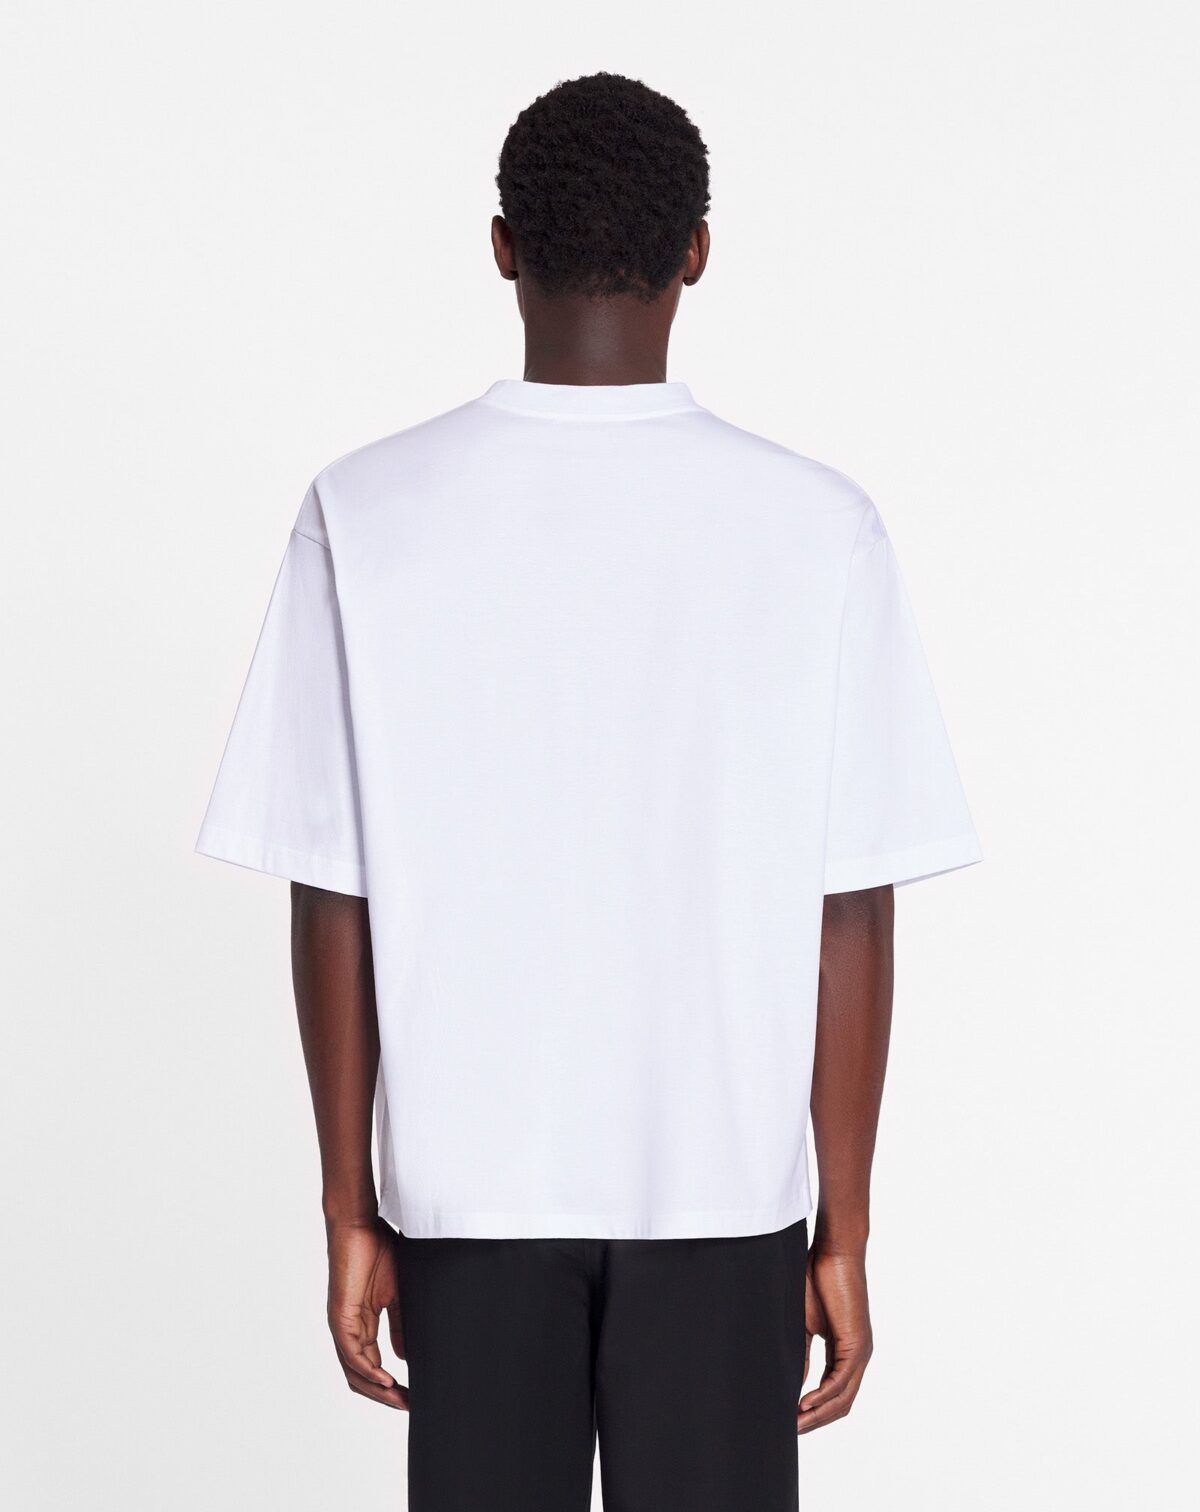 CURB LANVIN EMBROIDERED OVERSIZED T-SHIRT